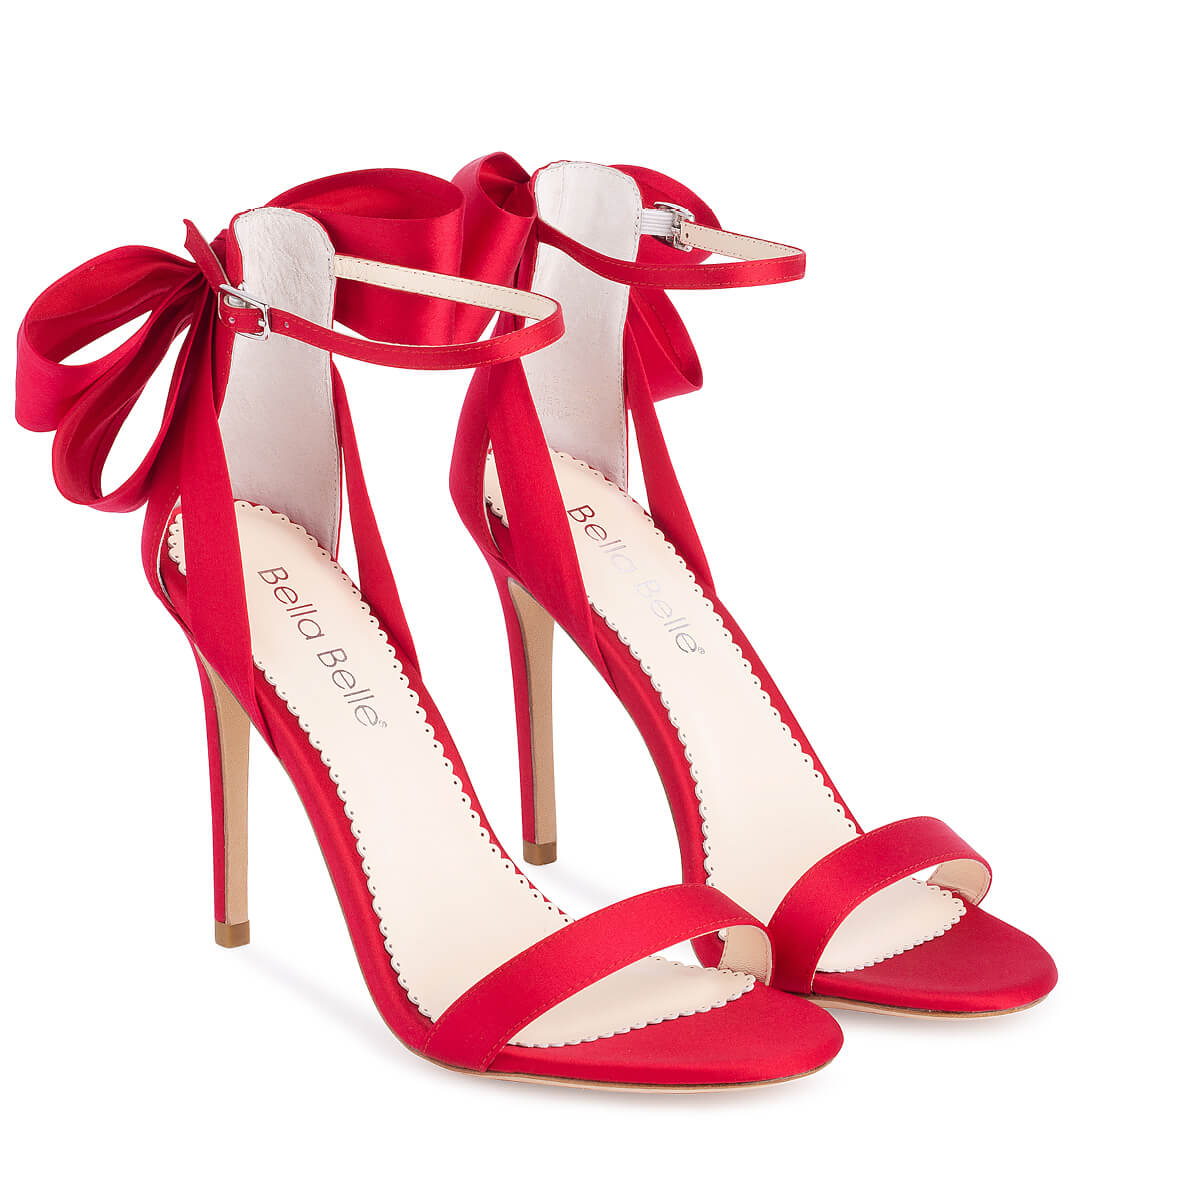 4-inch Open Toe Ankle Strap Red Heels with Bow | Bella Belle